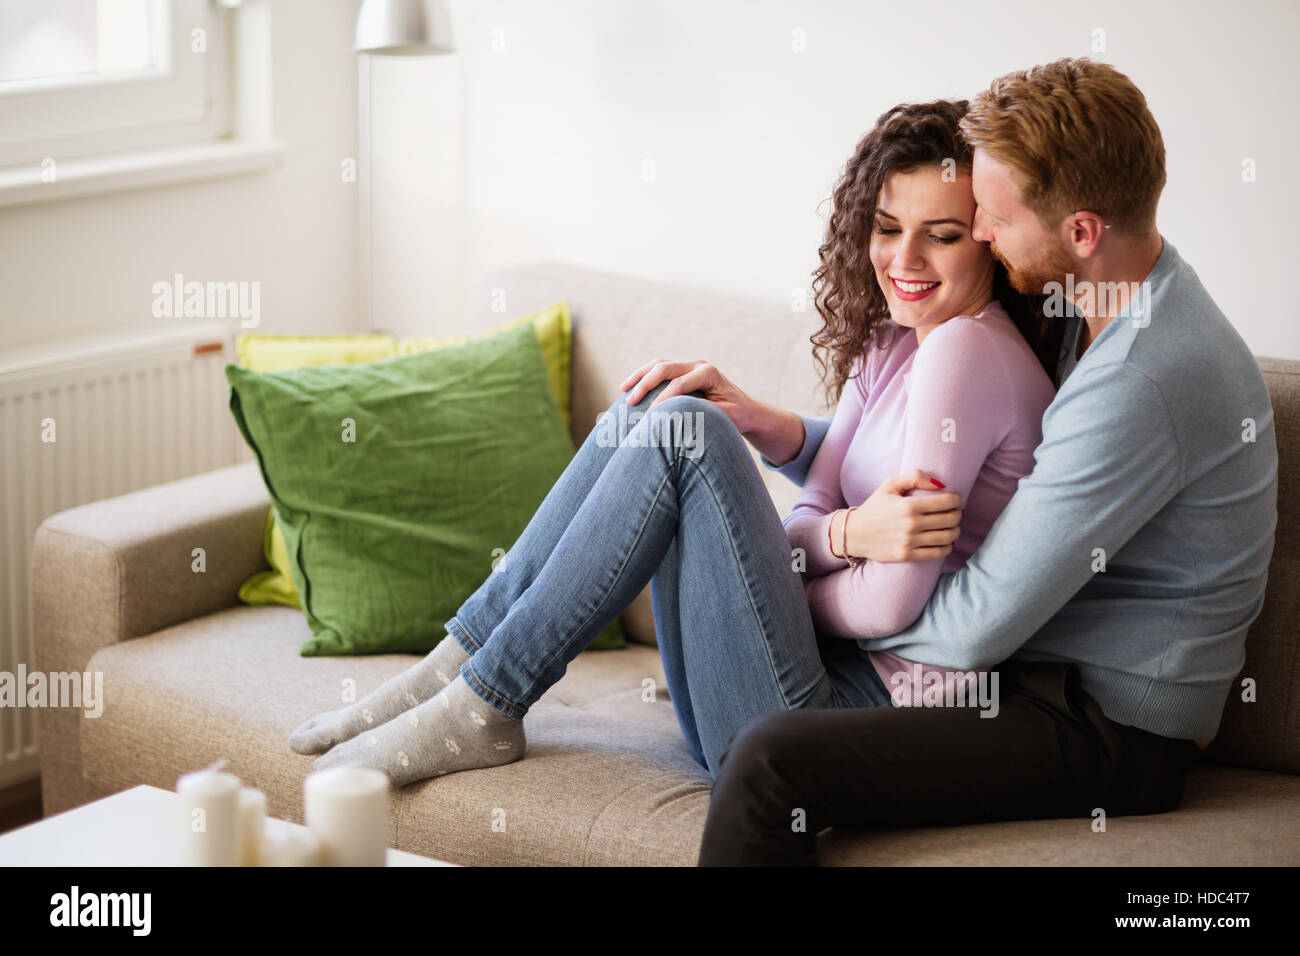 Couple in love hugging and smiling at home Banque D'Images